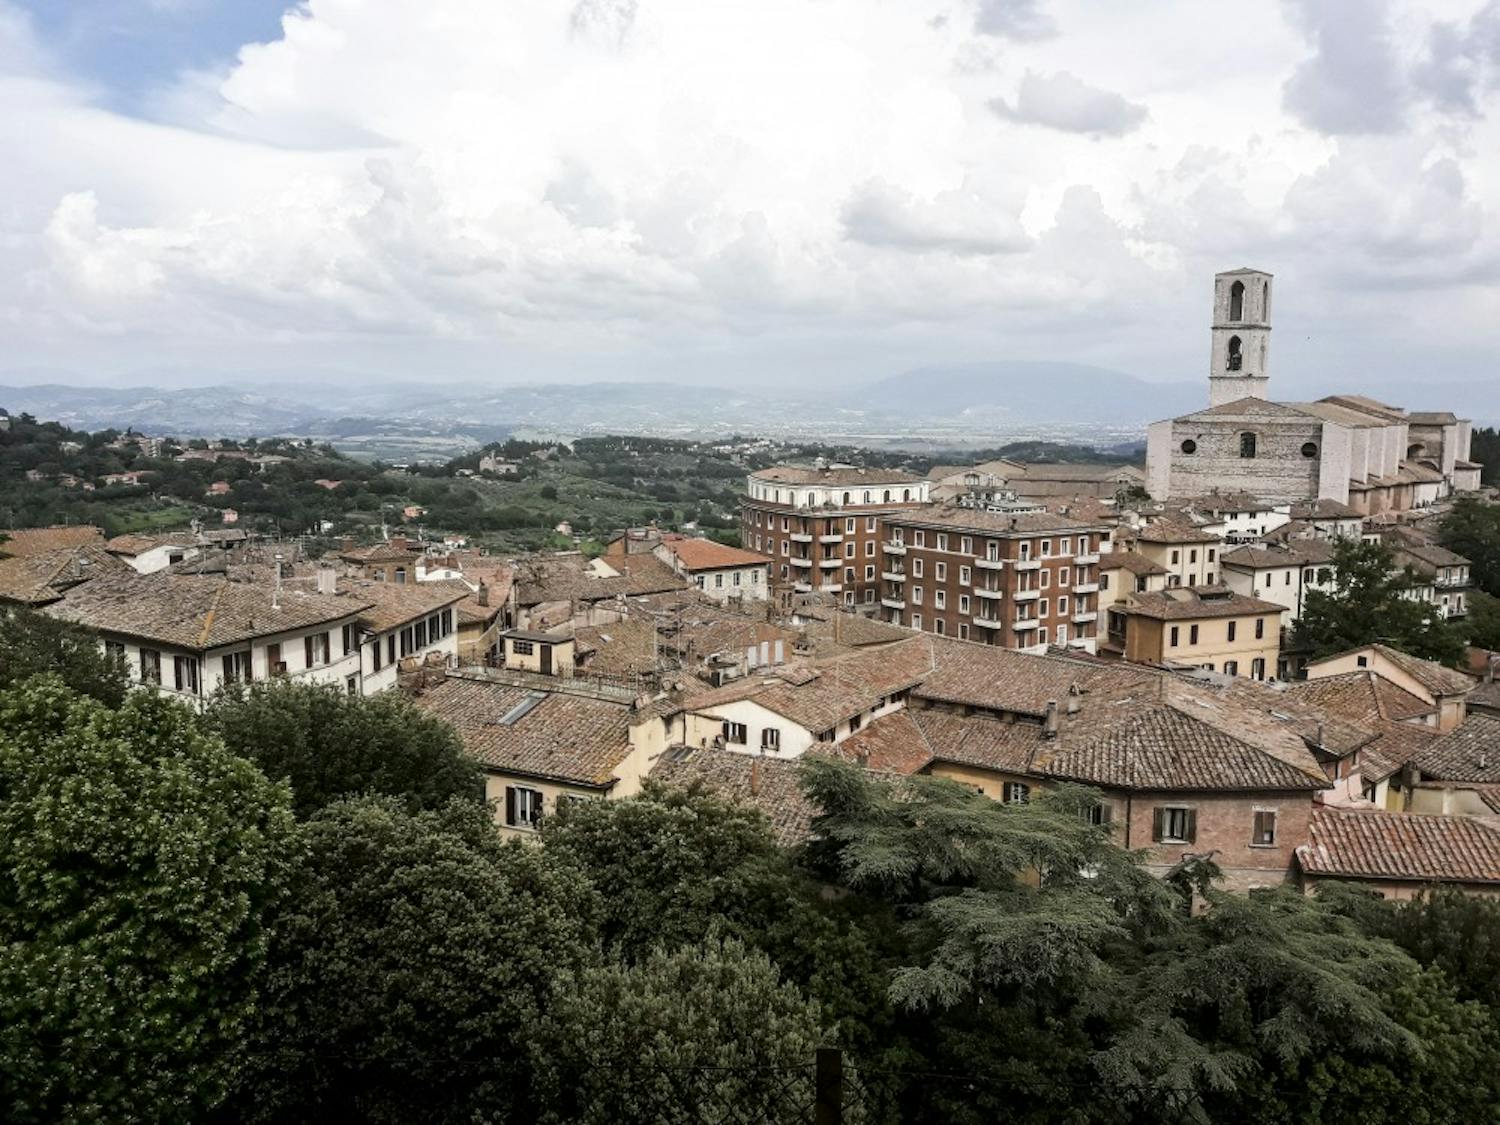 Perugia, Italy on May 27, 2018